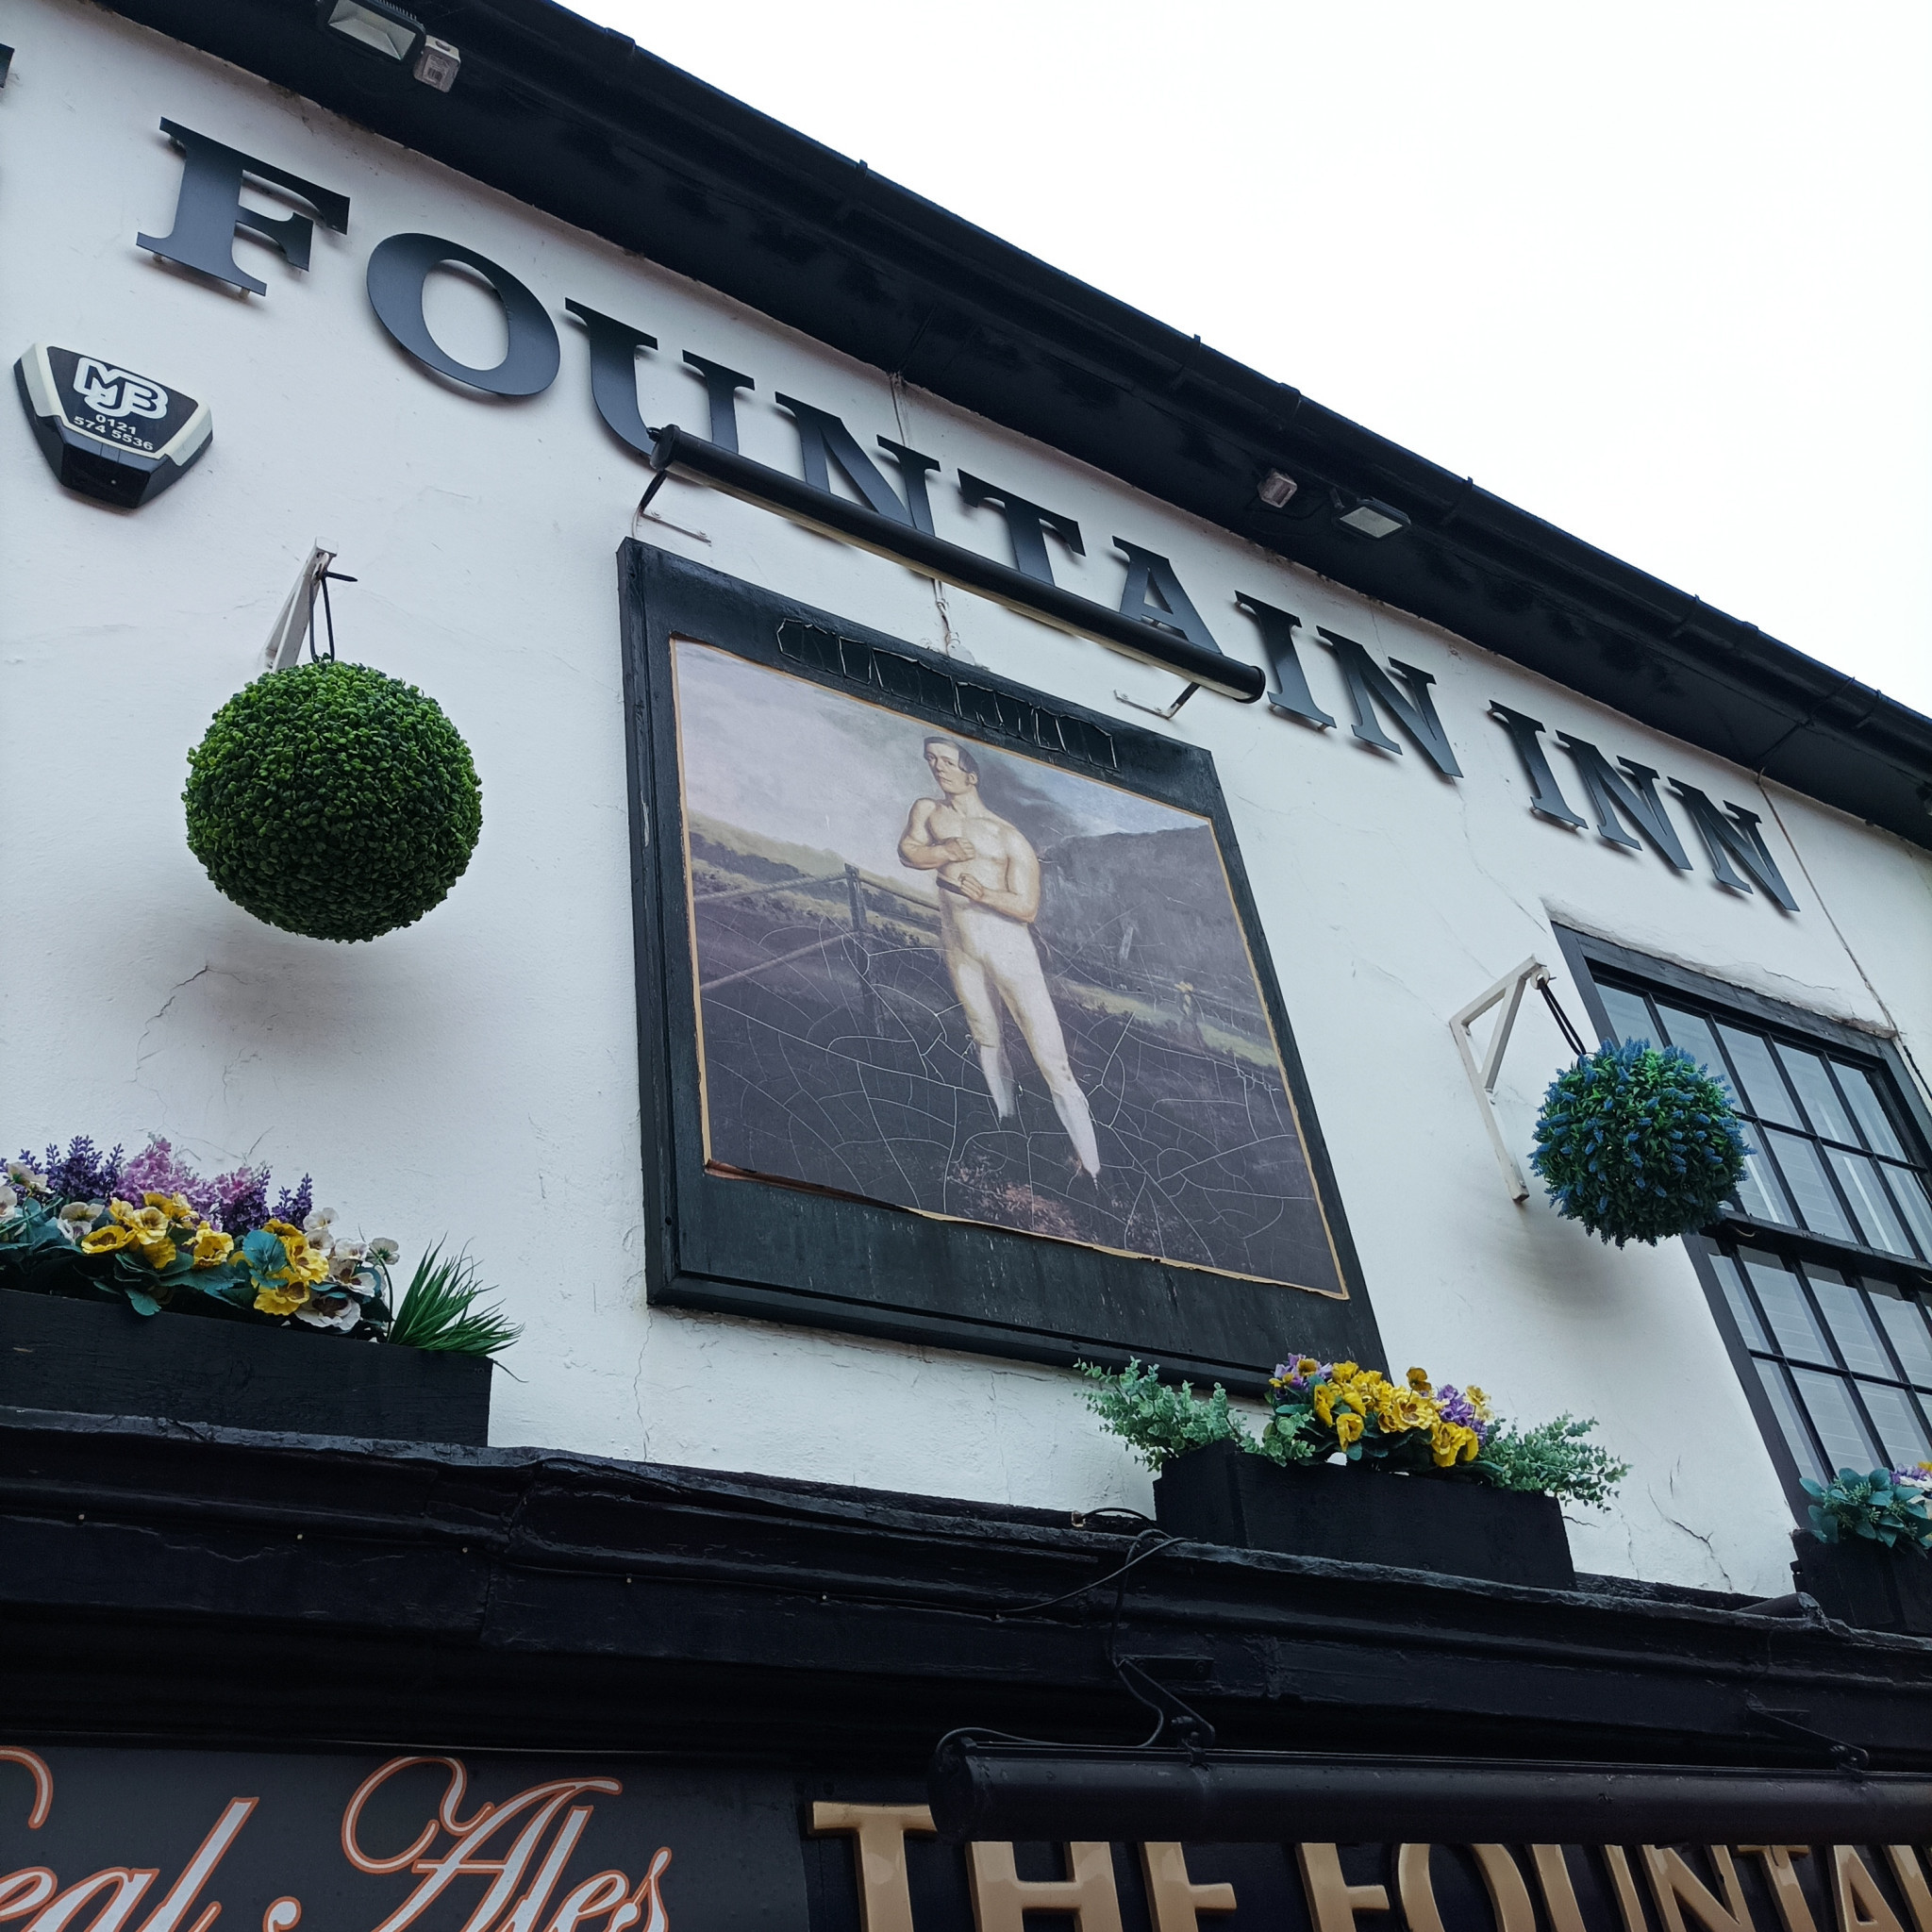 A painting, thought to be of William Perry is displayed above The Fountain Inn in Tipton  ©ITG